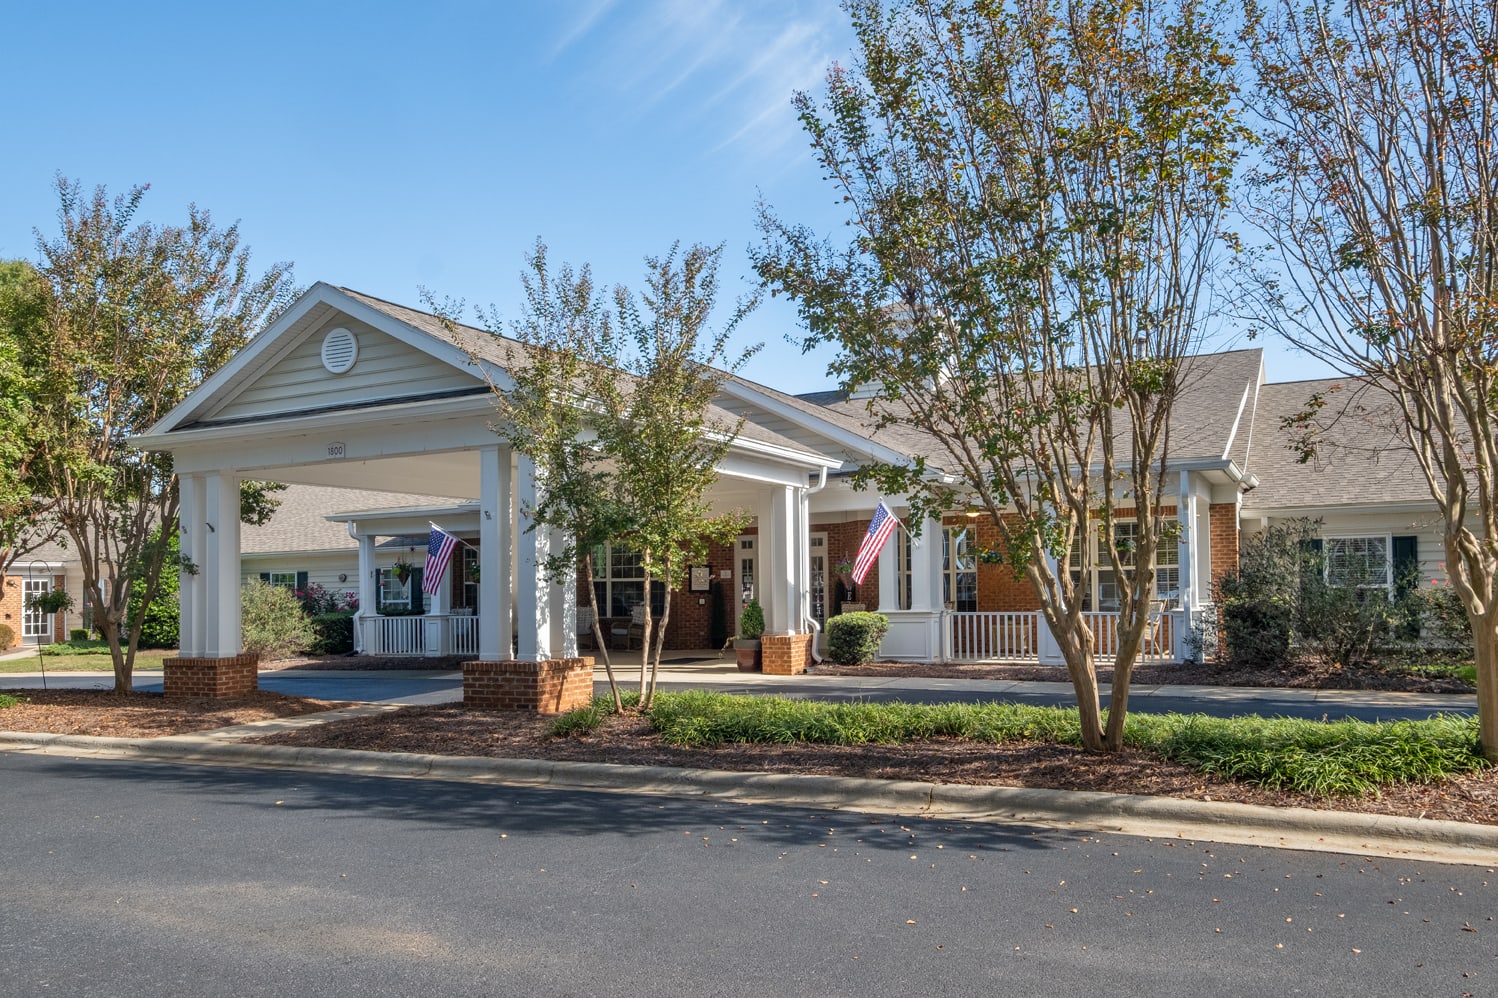 Chandler Place Assisted Living and Memory Care community exterior